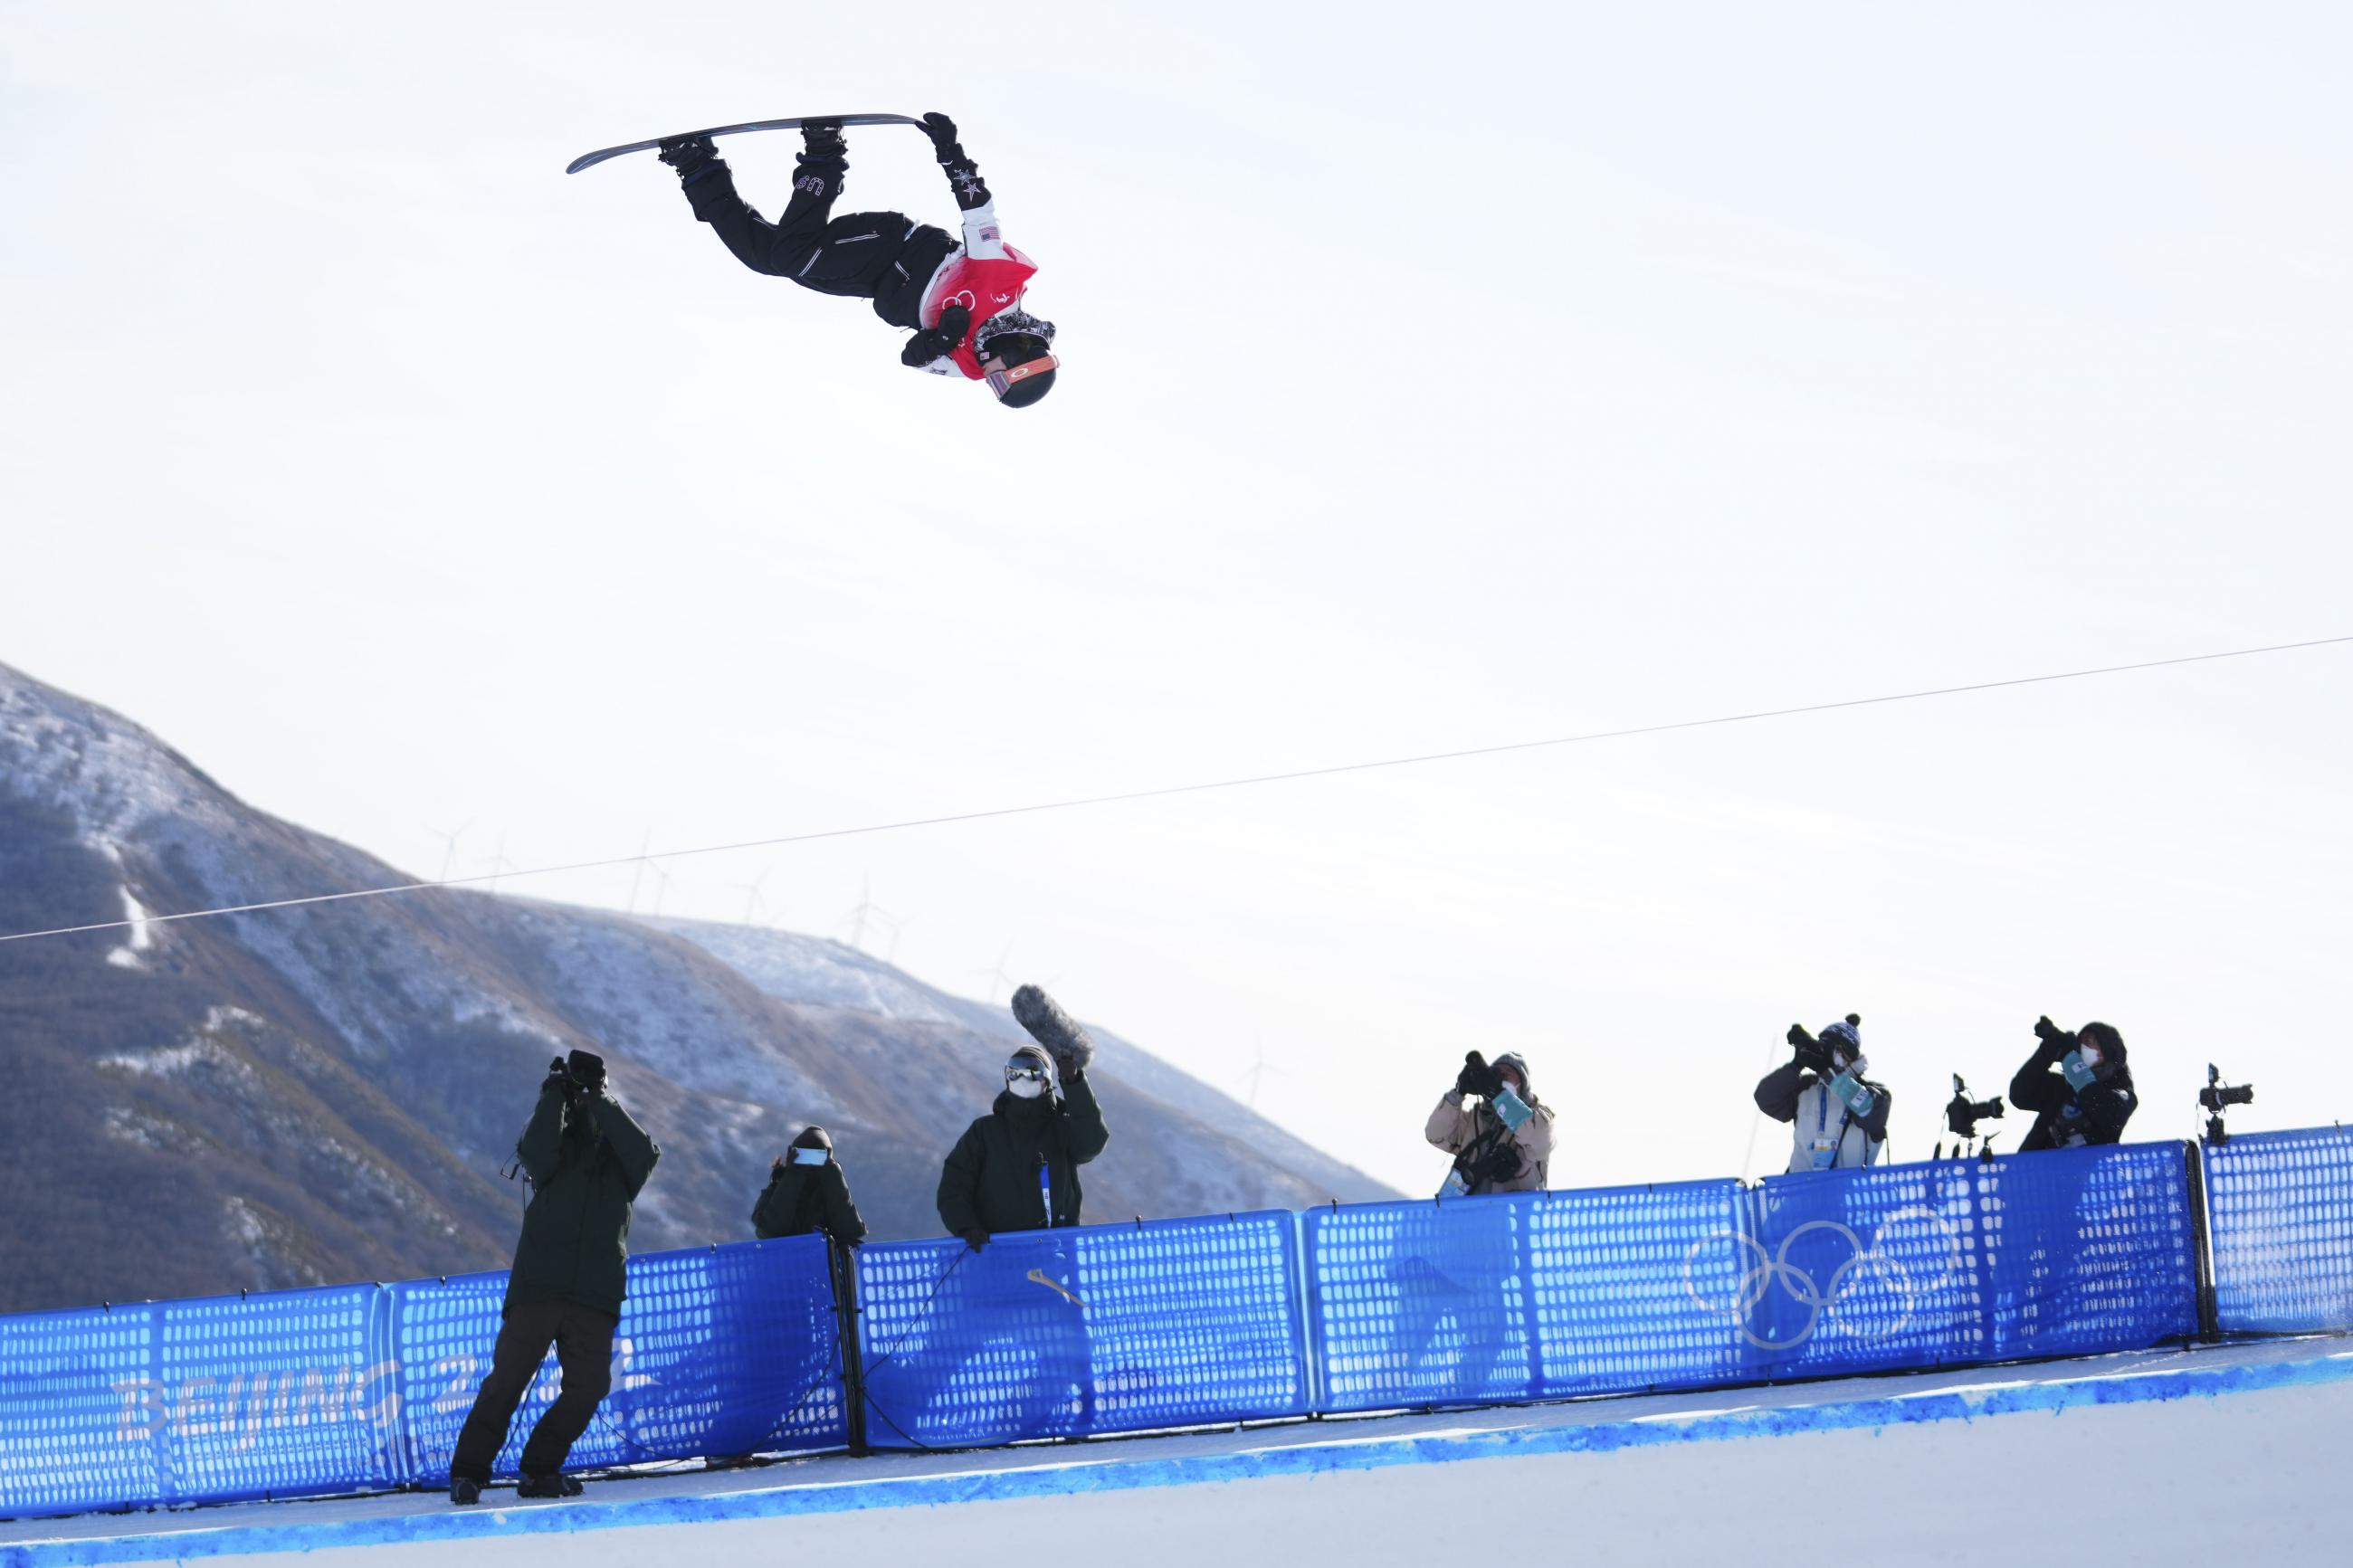 Taylor Gold (USA) goes airborne as photographers in masks shoot photos from below during the snowboard mens halfpipe final at the Beijing 2022 Olympic Winter Games at Genting Snow Park. 